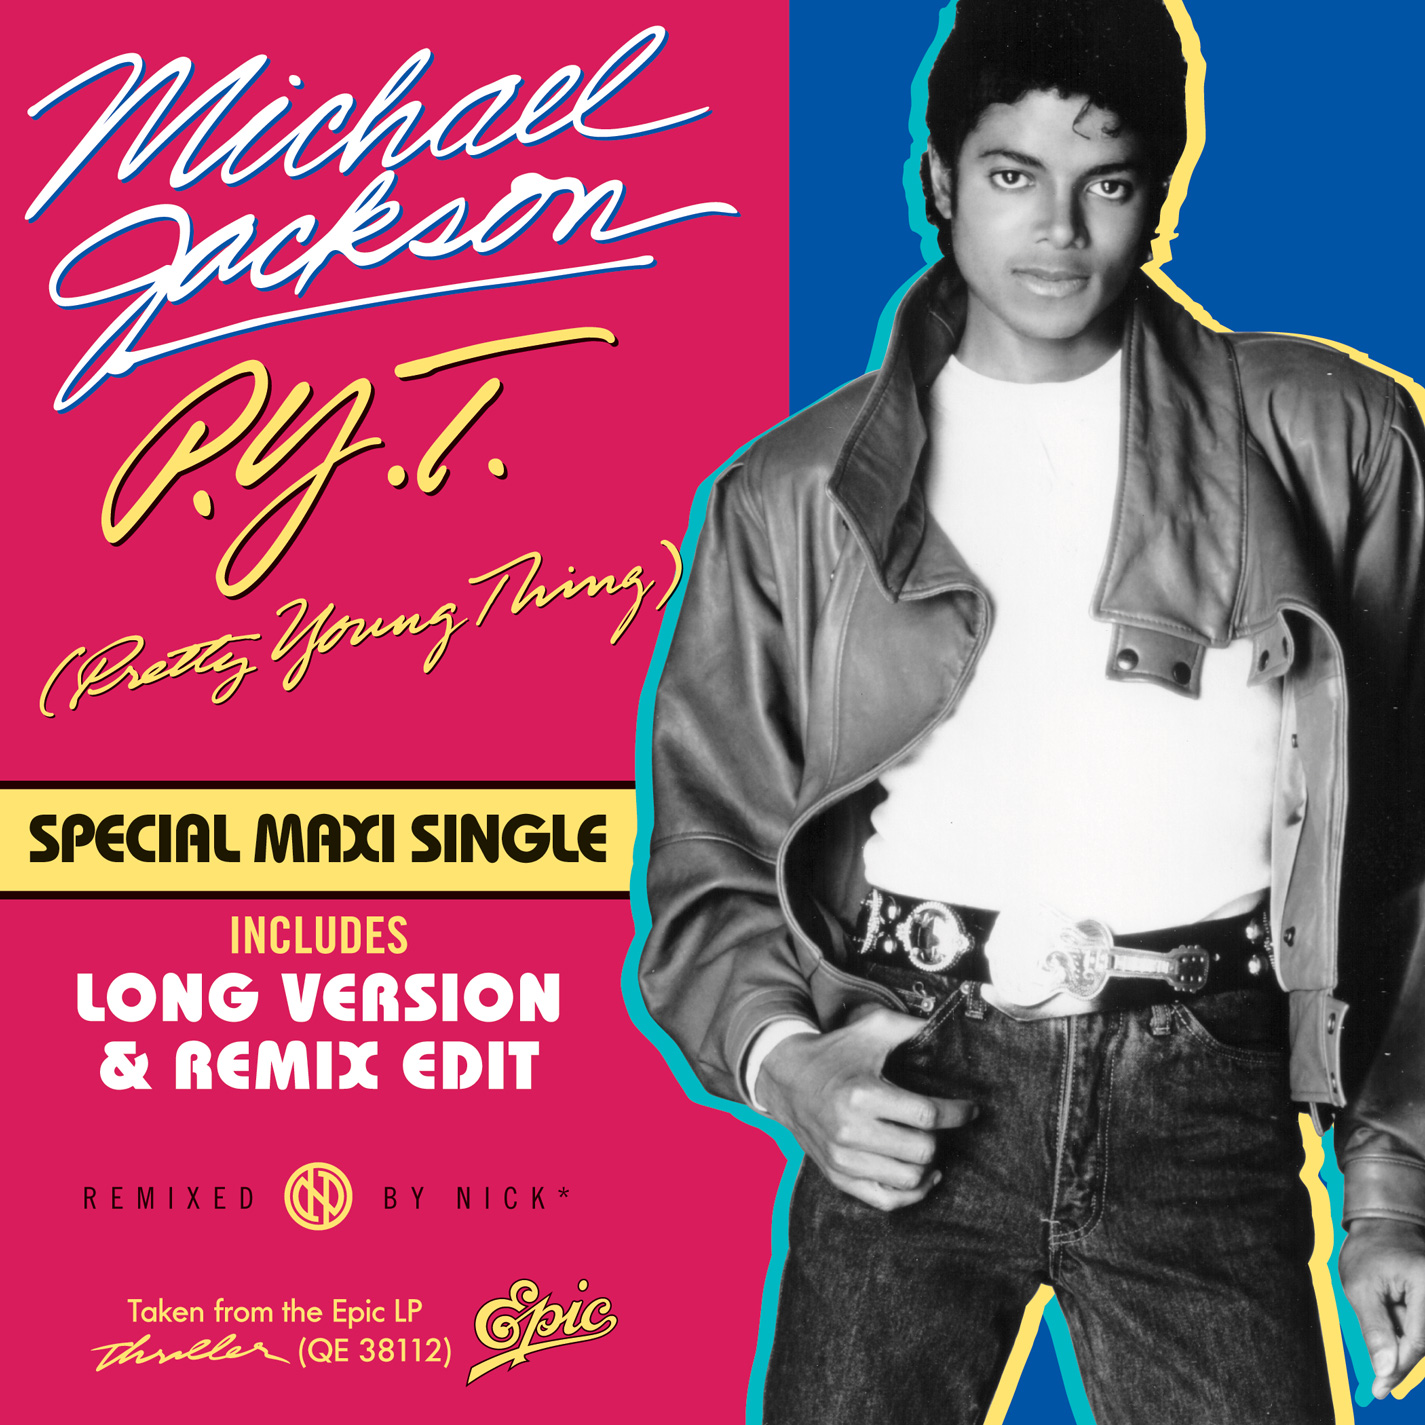 Michael Jackson - P.Y.T. (Pretty Young Thing) Reconstructed by Nick*